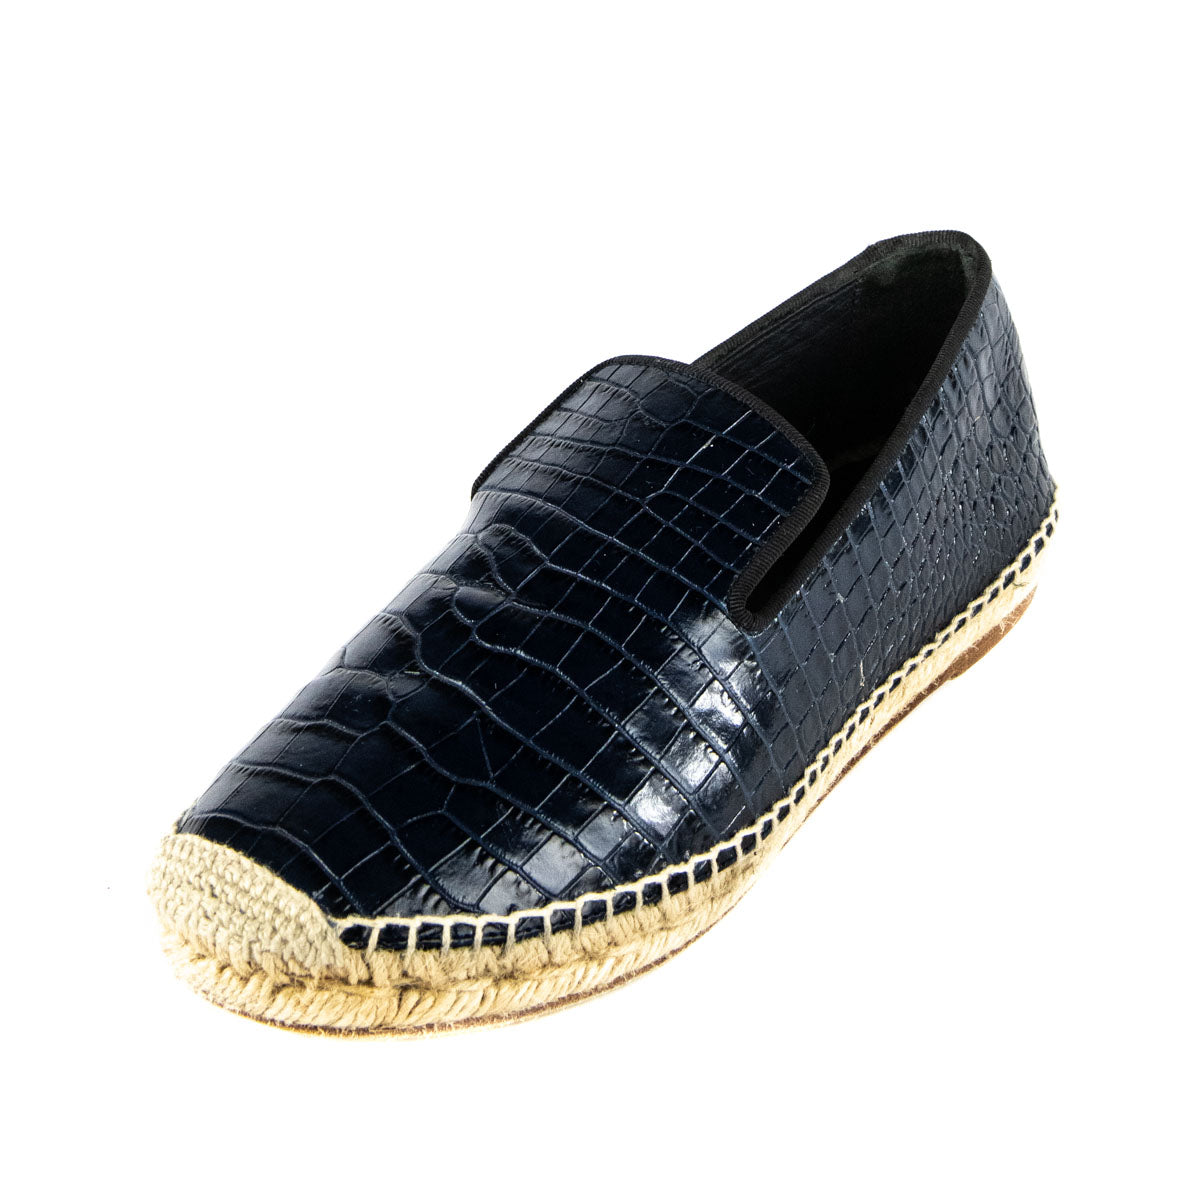 Celine Navy Patent Leather Crocodile Embossed Espadrilles Size 7 | EU 37 - Love that Bag etc - Preowned Authentic Designer Handbags & Preloved Fashions